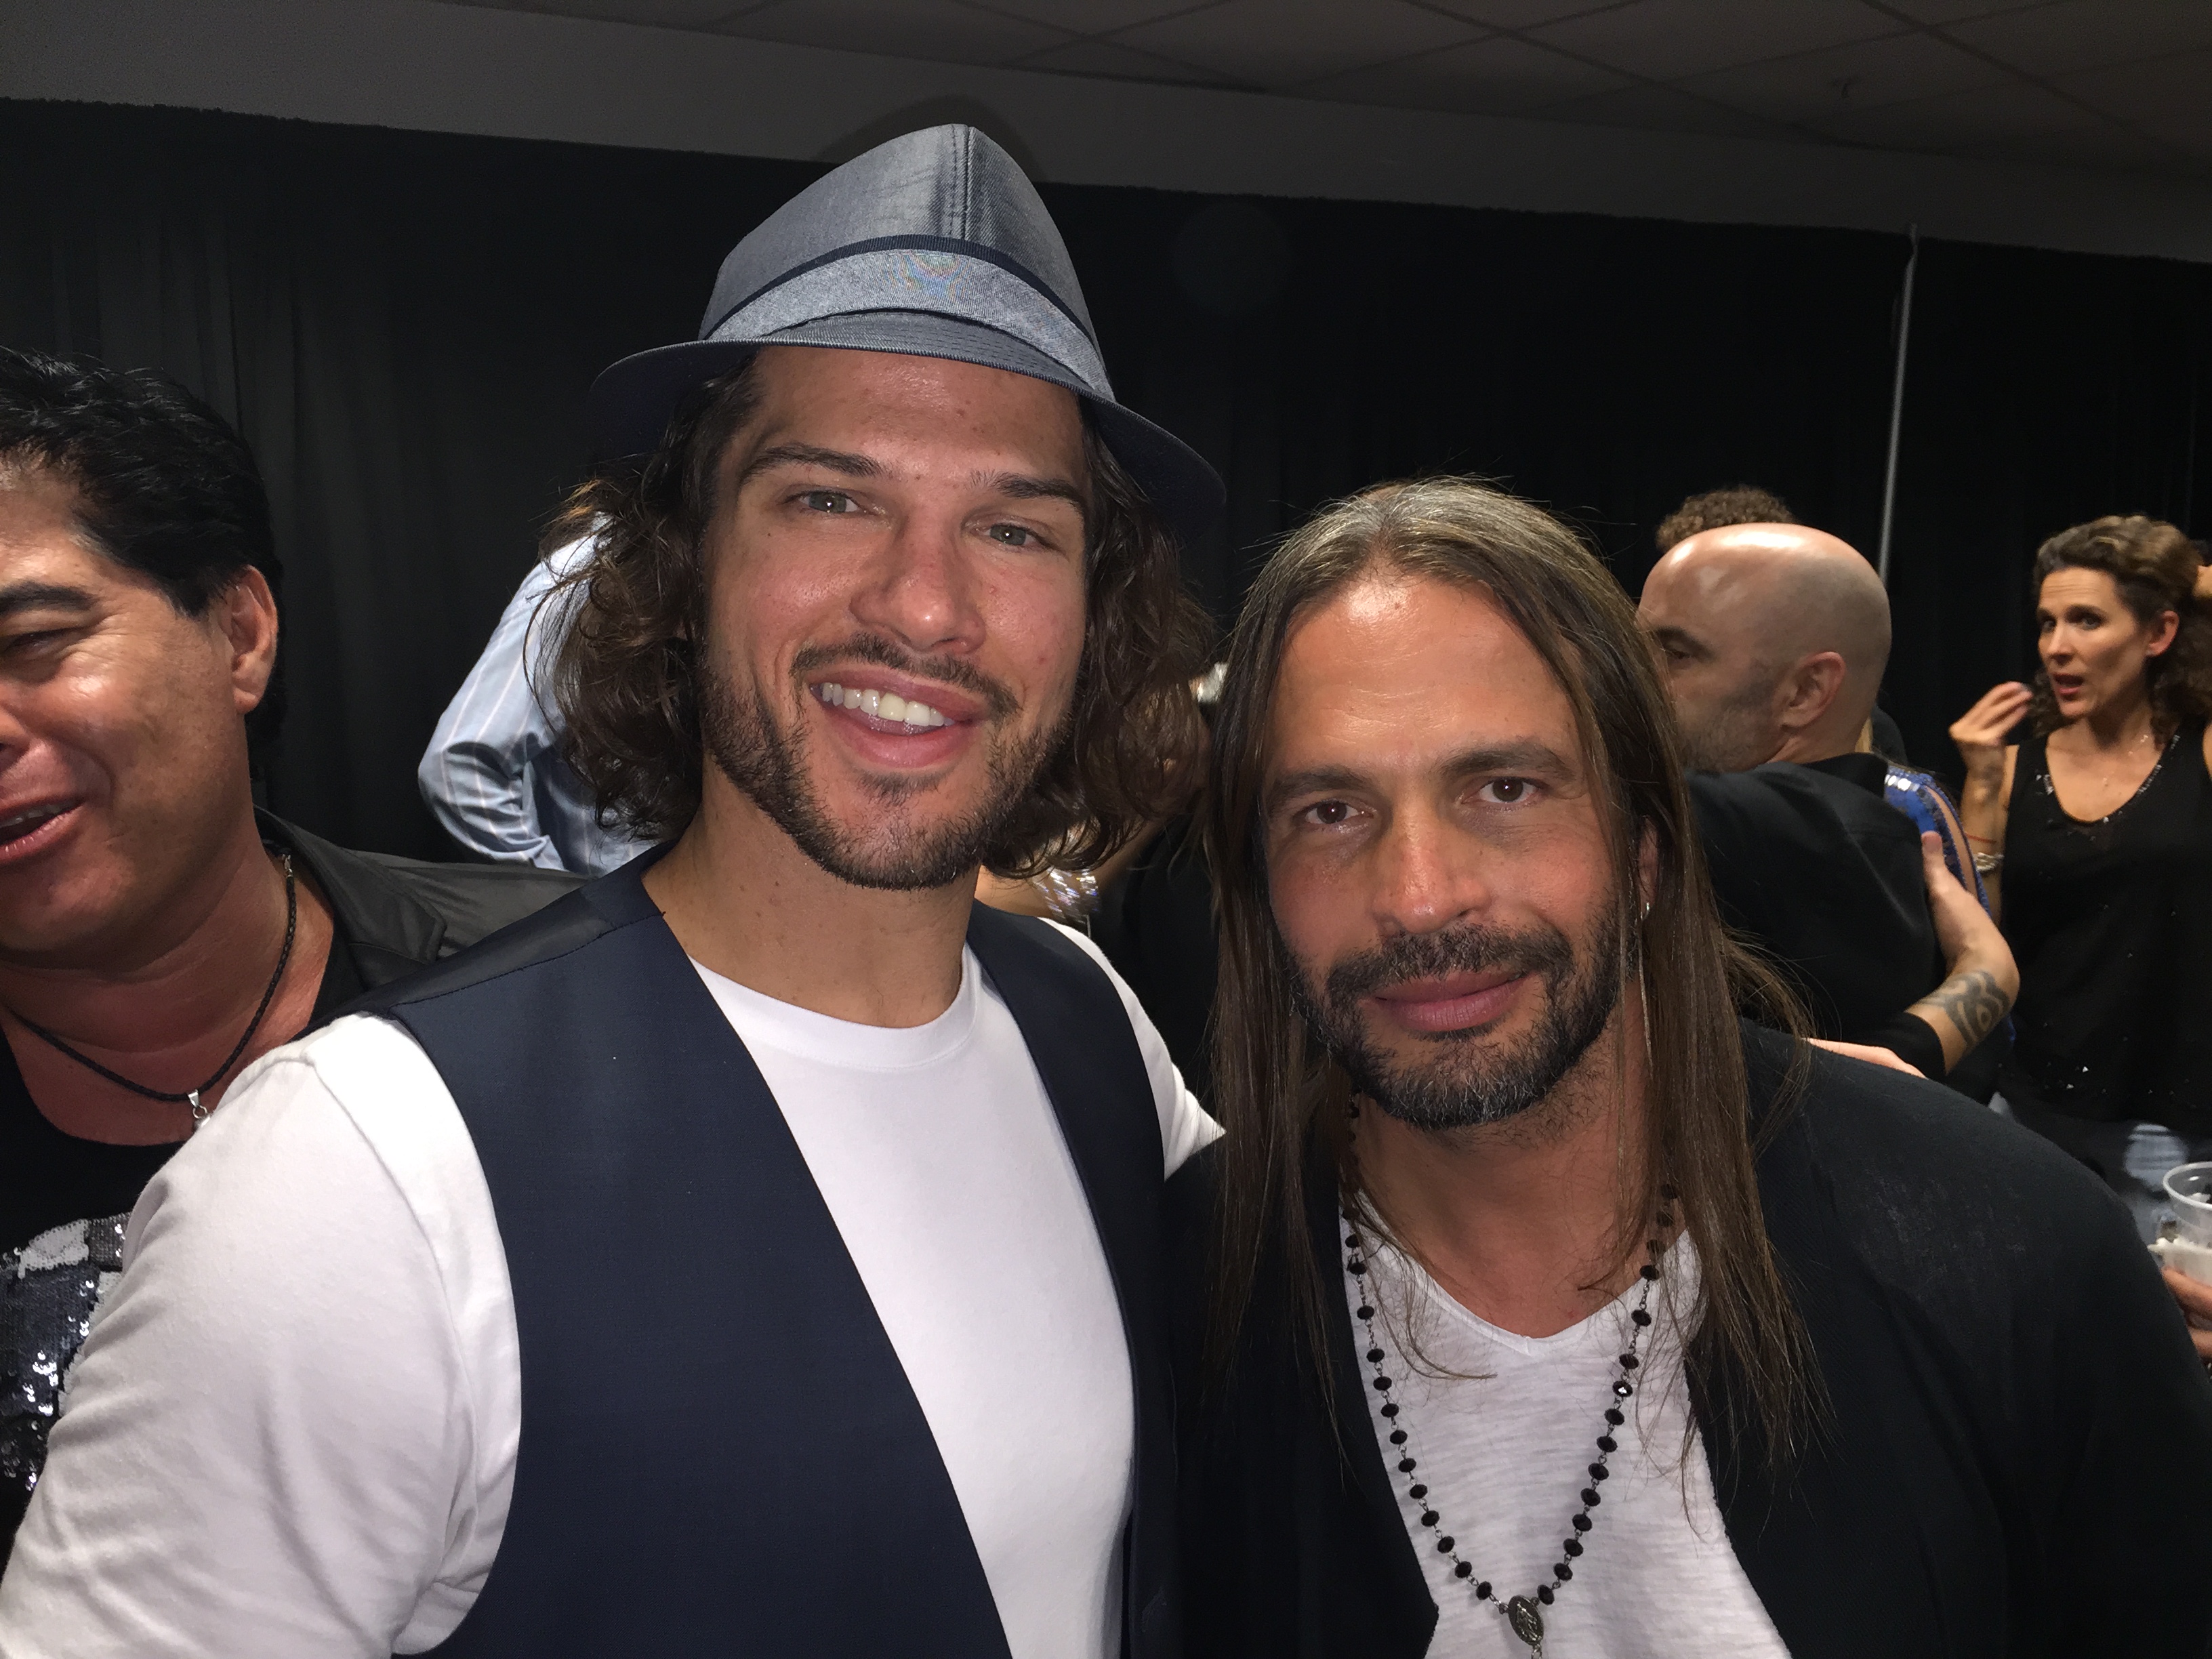 Evan_Charles_Backstage_With_Mana_Lead_Guitar_and_Grammy_winner_Sergio_Vallín